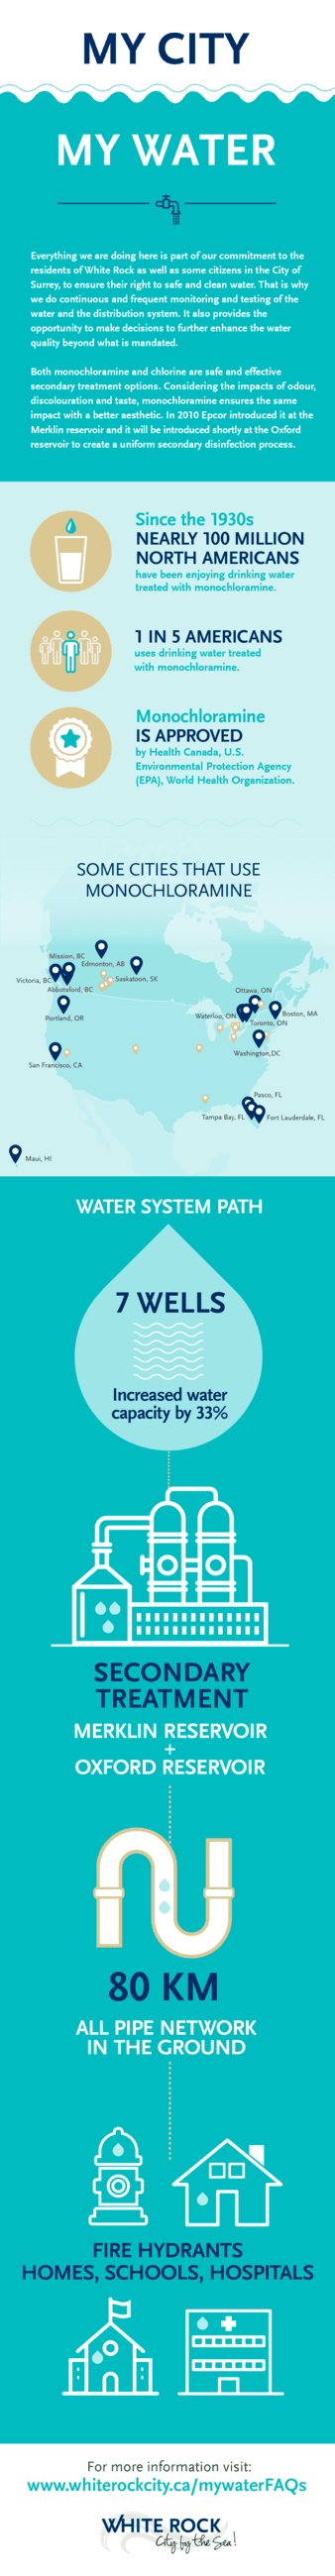 White Rock Water System infographic